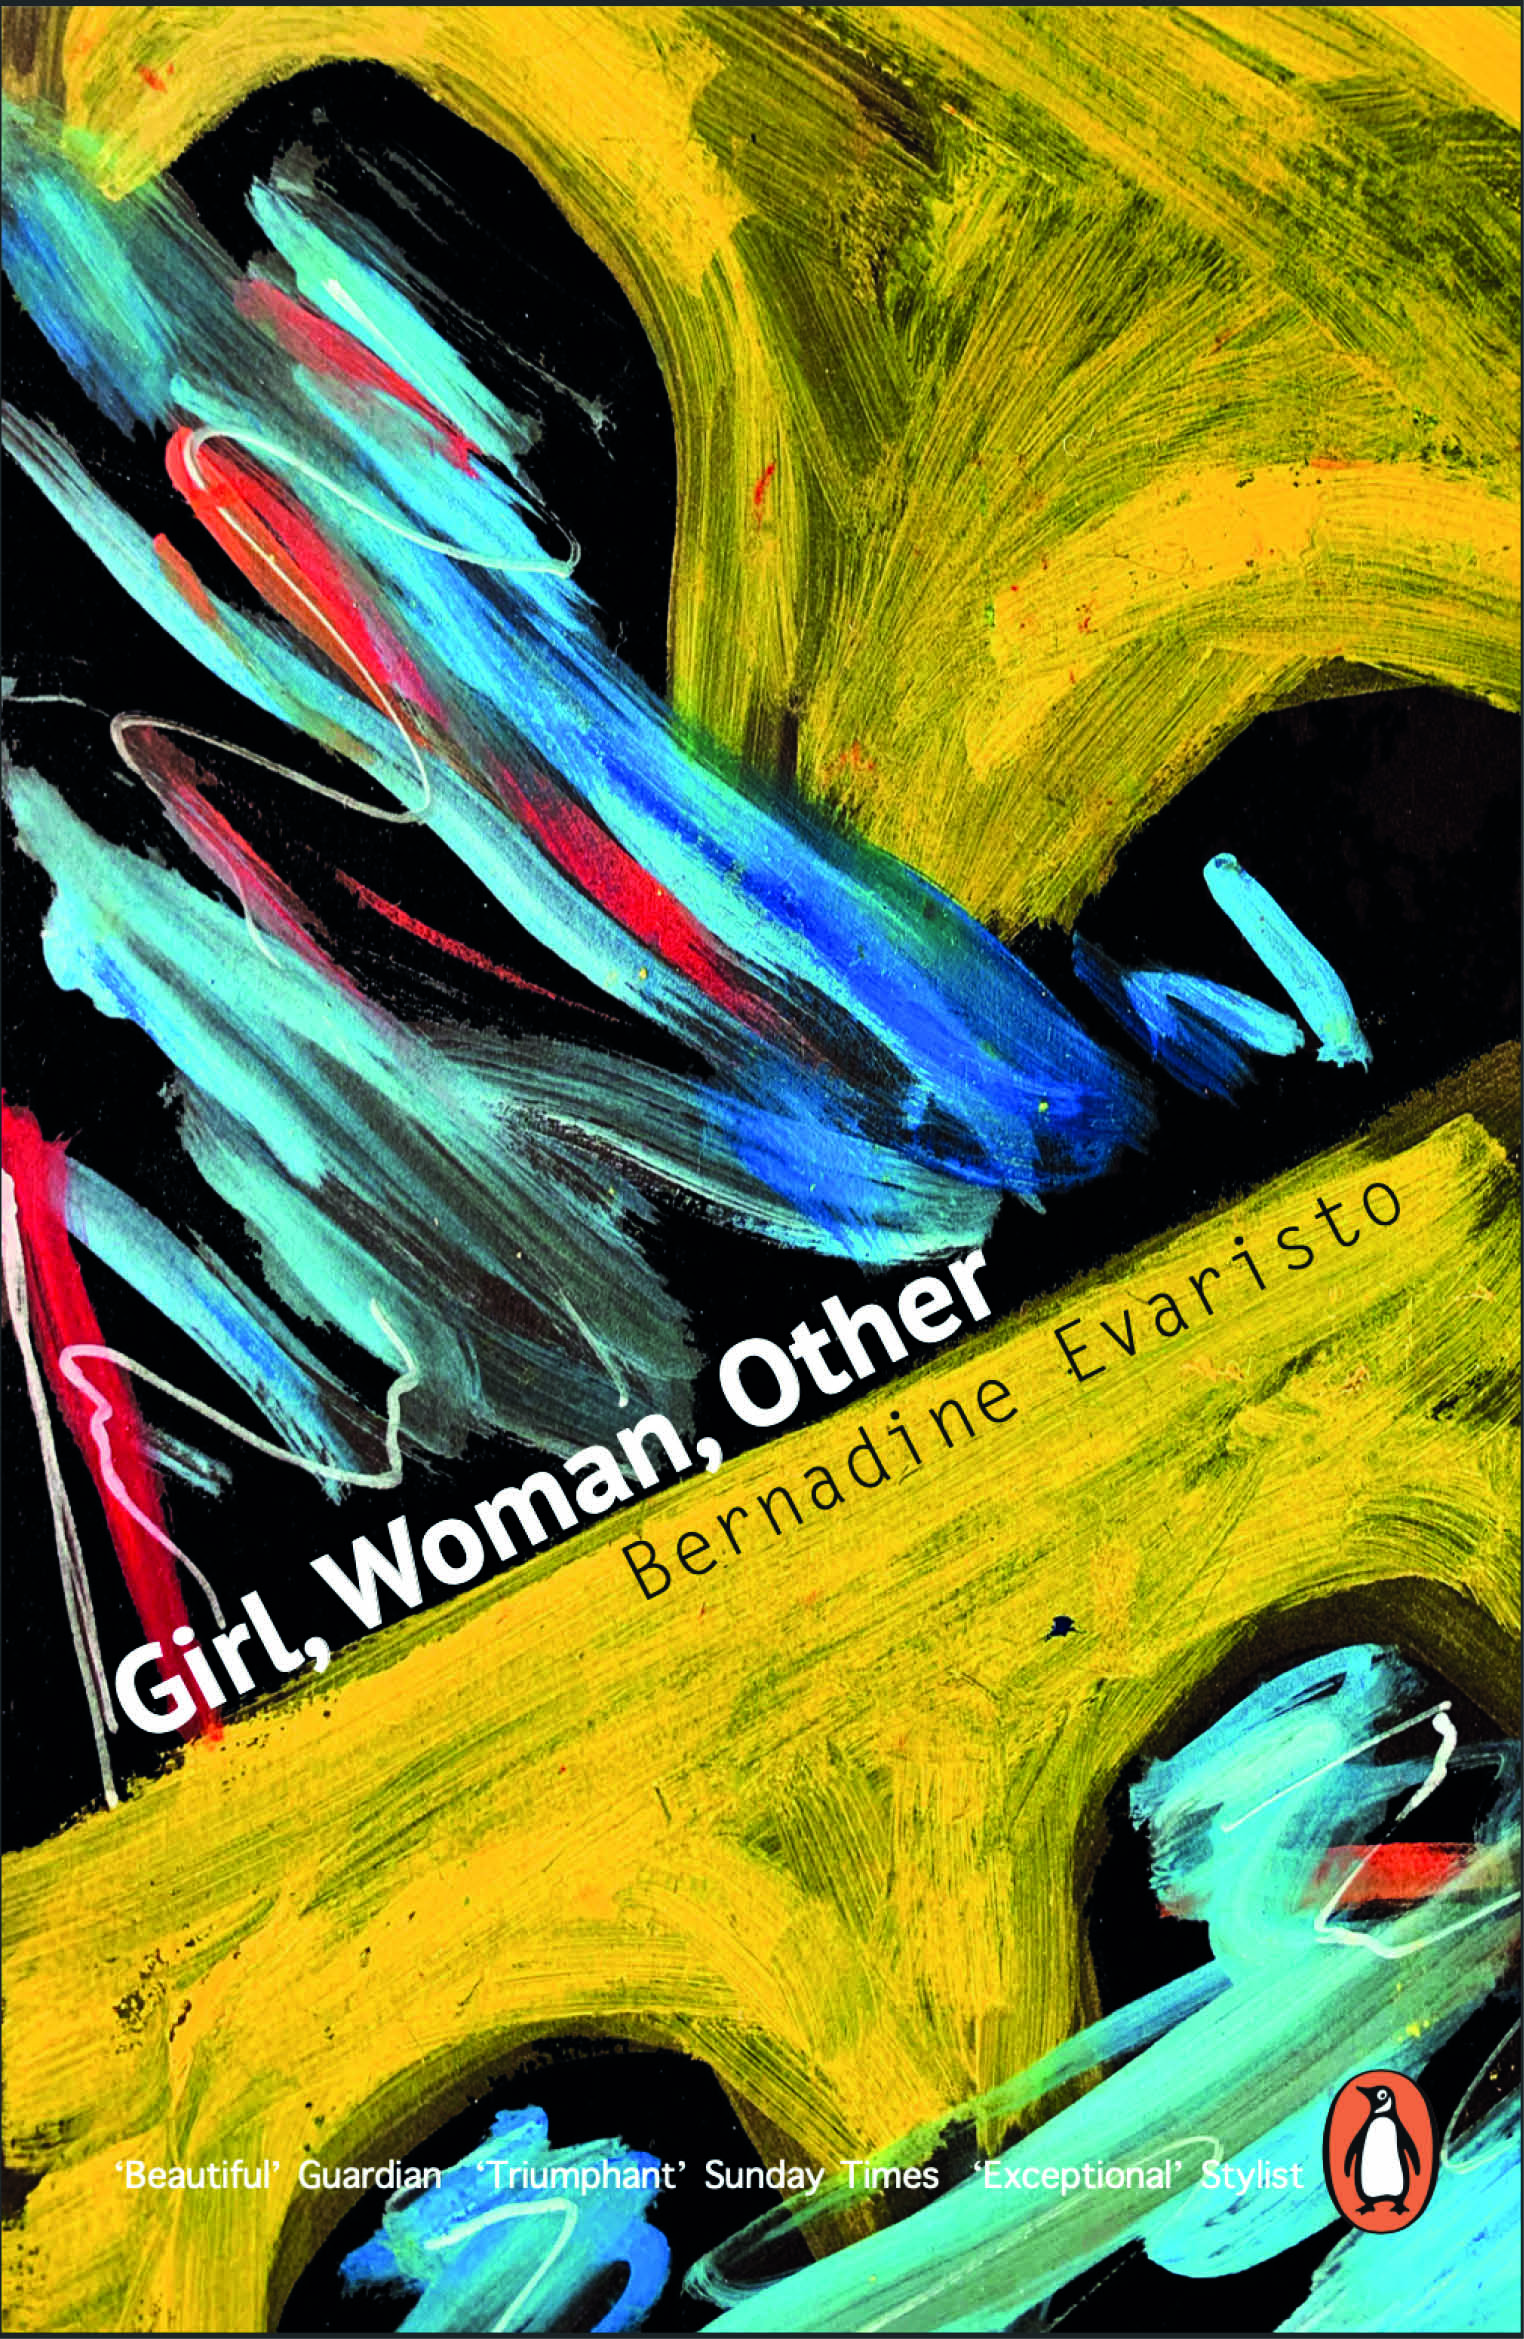 Abstract book cover illustration for the novel 'Girl, Woman, Other' by Bernadine Evaristo, by Naomi Scott